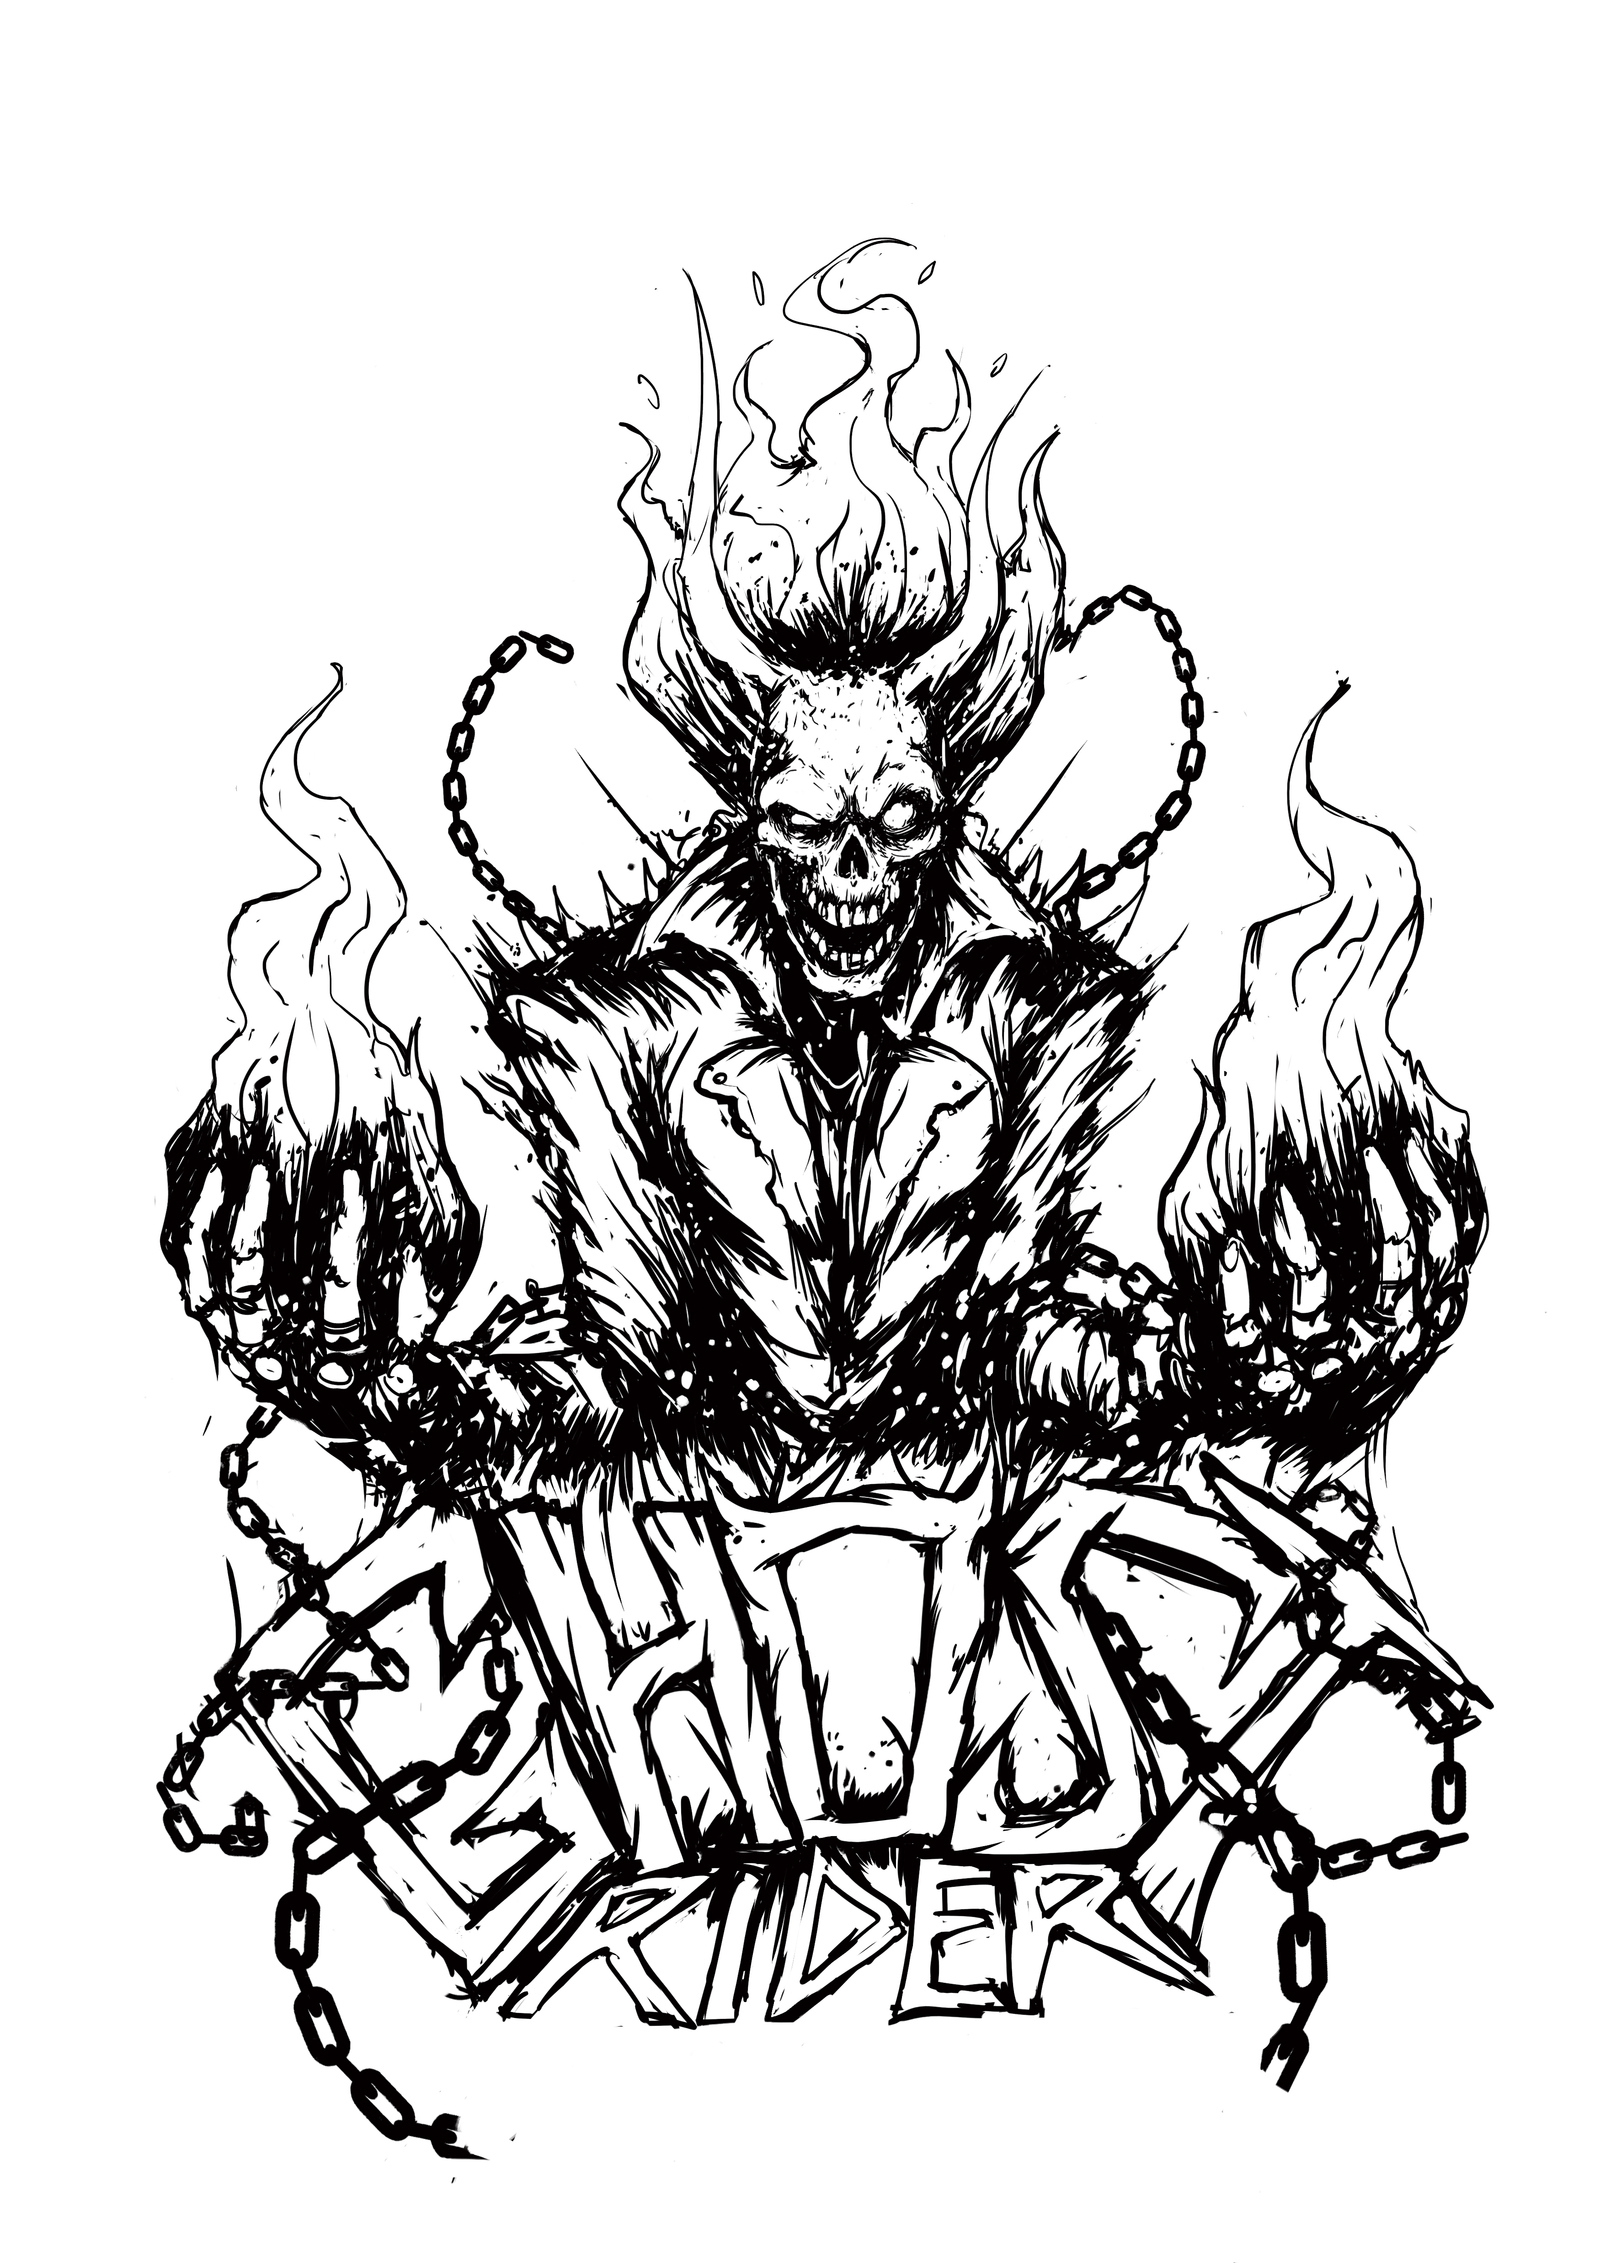 ghost rider coloring pagestrackid=sp 006